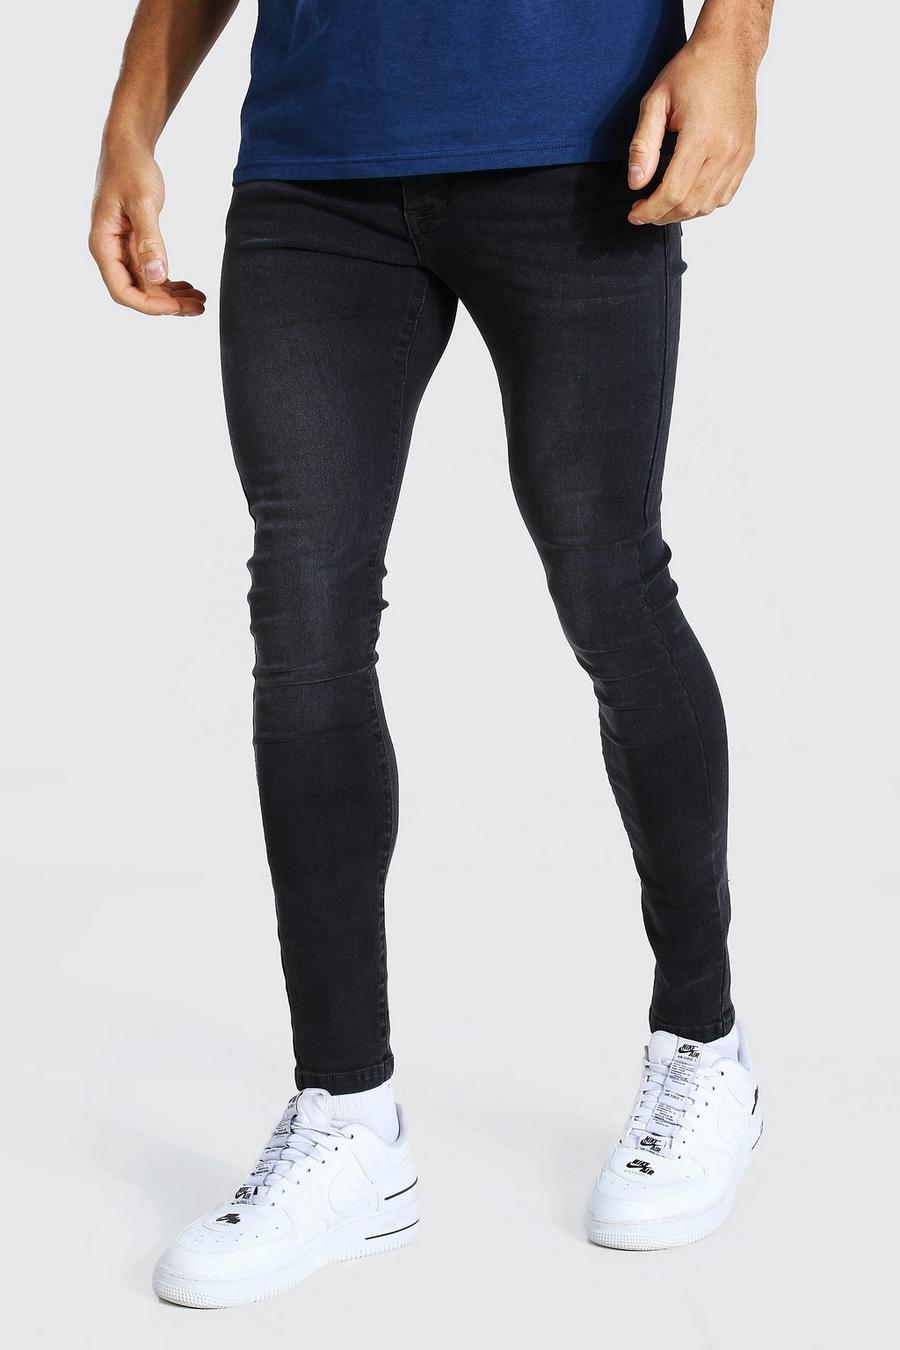 Charcoal grey Super Skinny Stretch Jeans image number 1